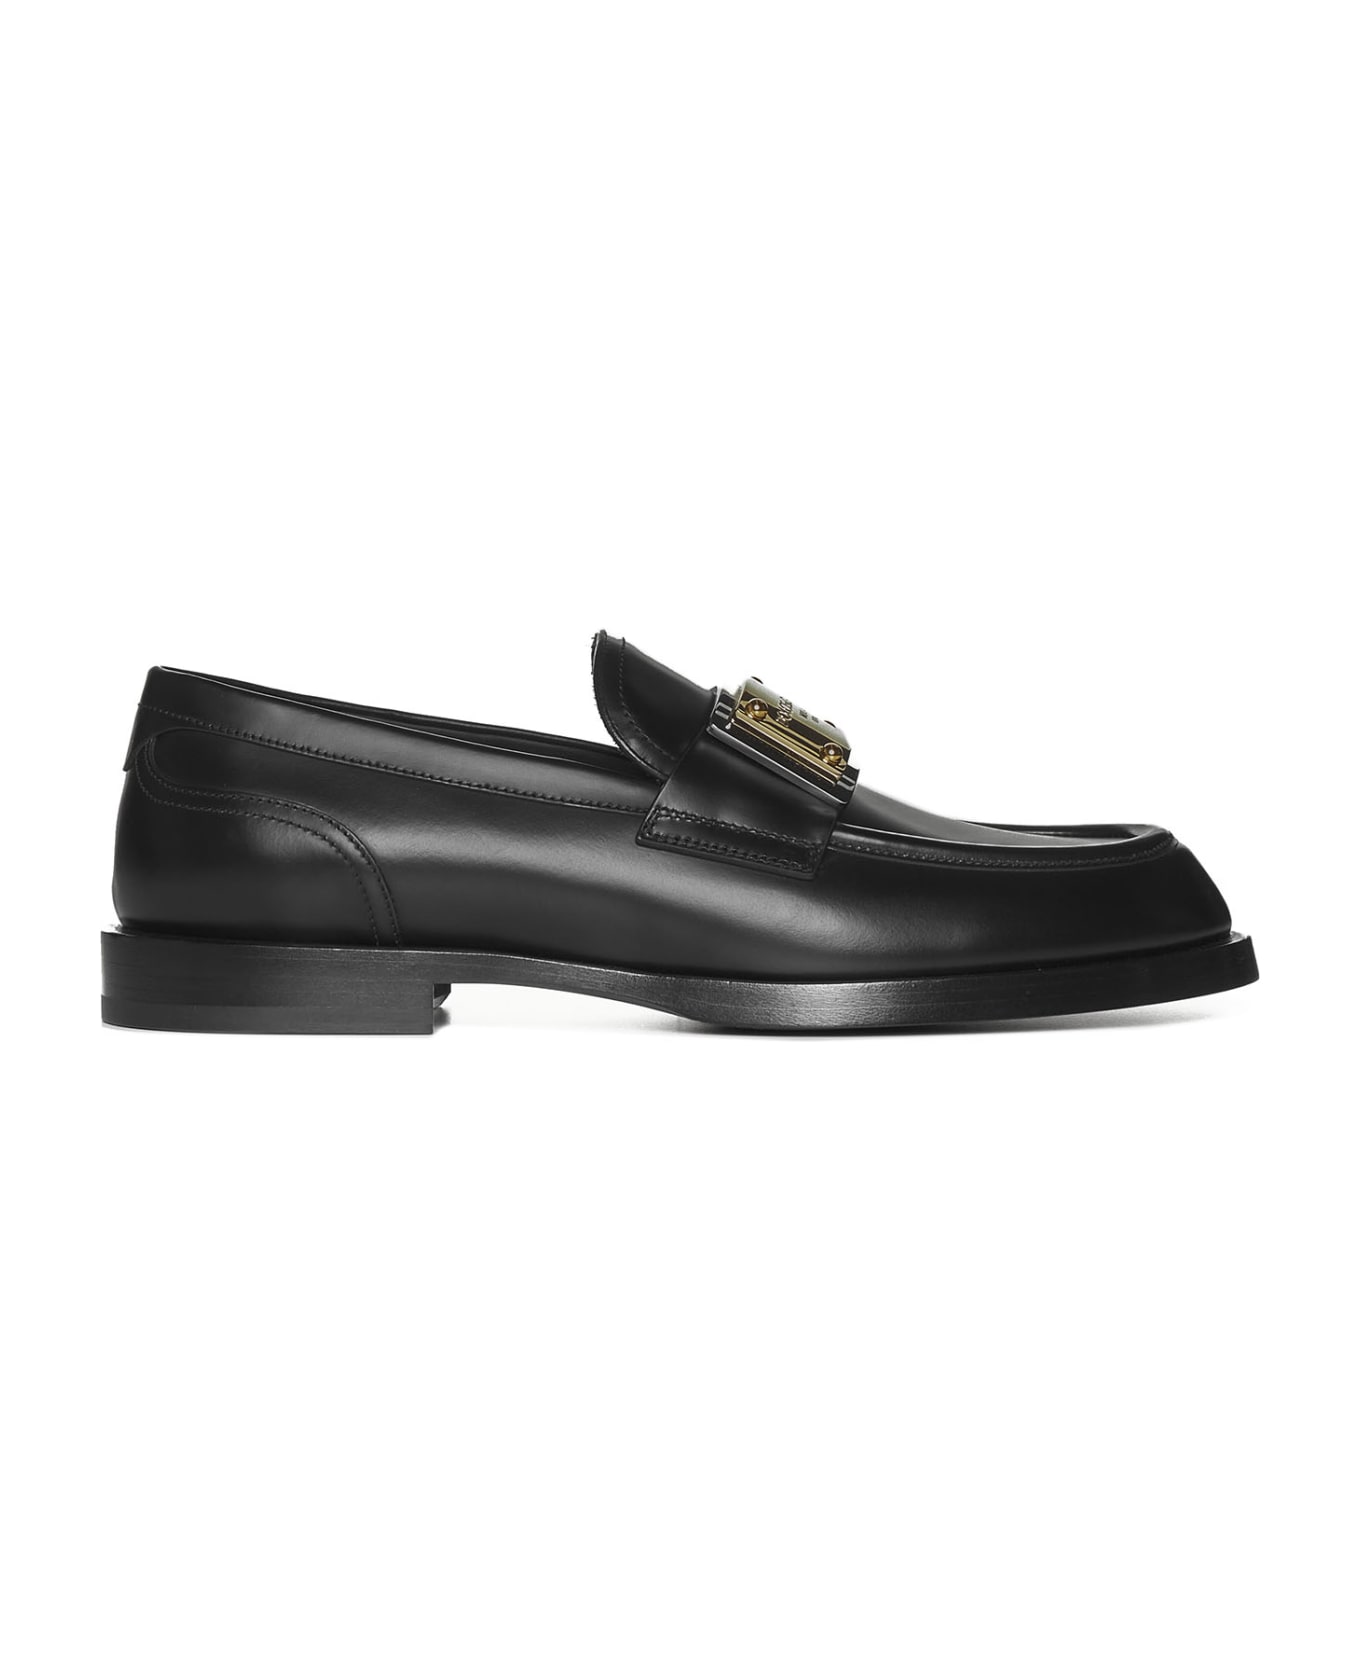 Dolce & Gabbana Leather Loafers - Black ローファー＆デッキシューズ